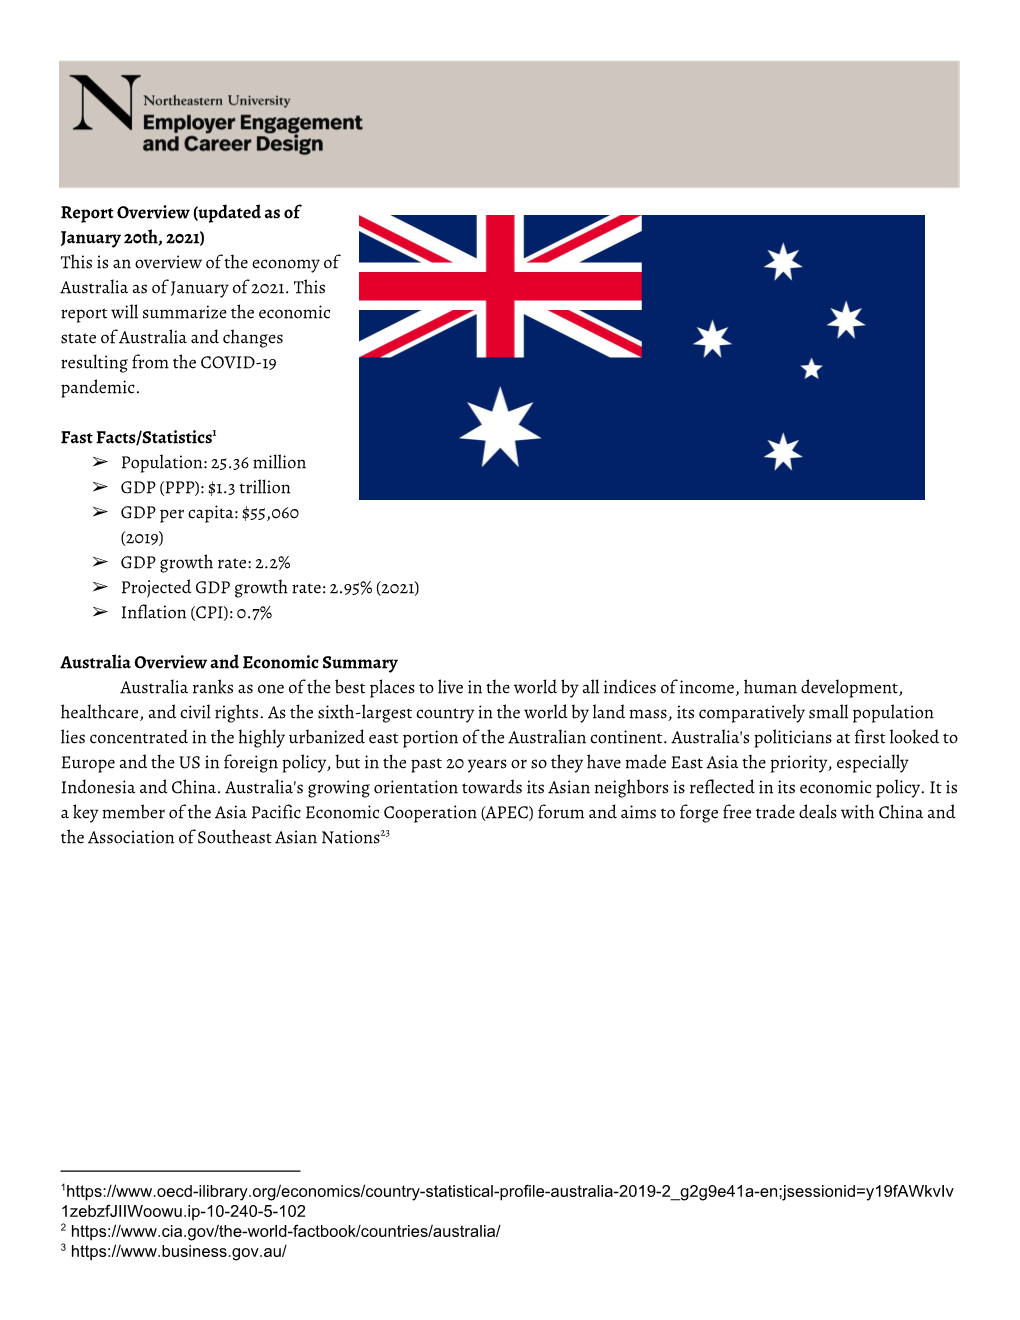 Report Overview (Updated As of January 20Th, 2021) This Is an Overview of the Economy of Australia As of January of 2021